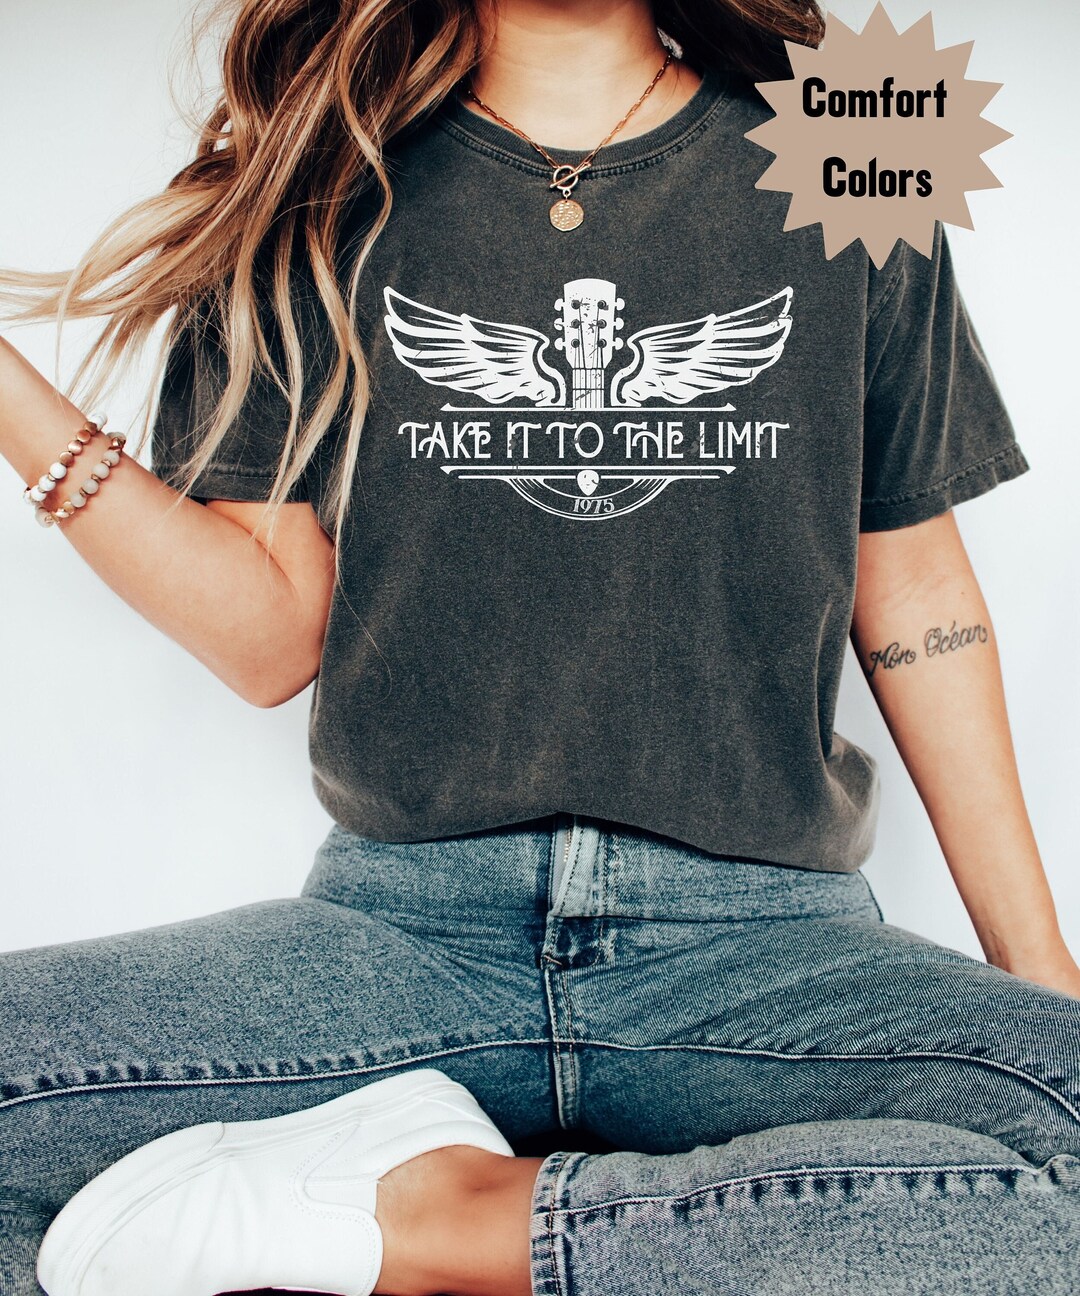 Take It to the Limit Shirt Comfort Colors Vintage T-shirt 